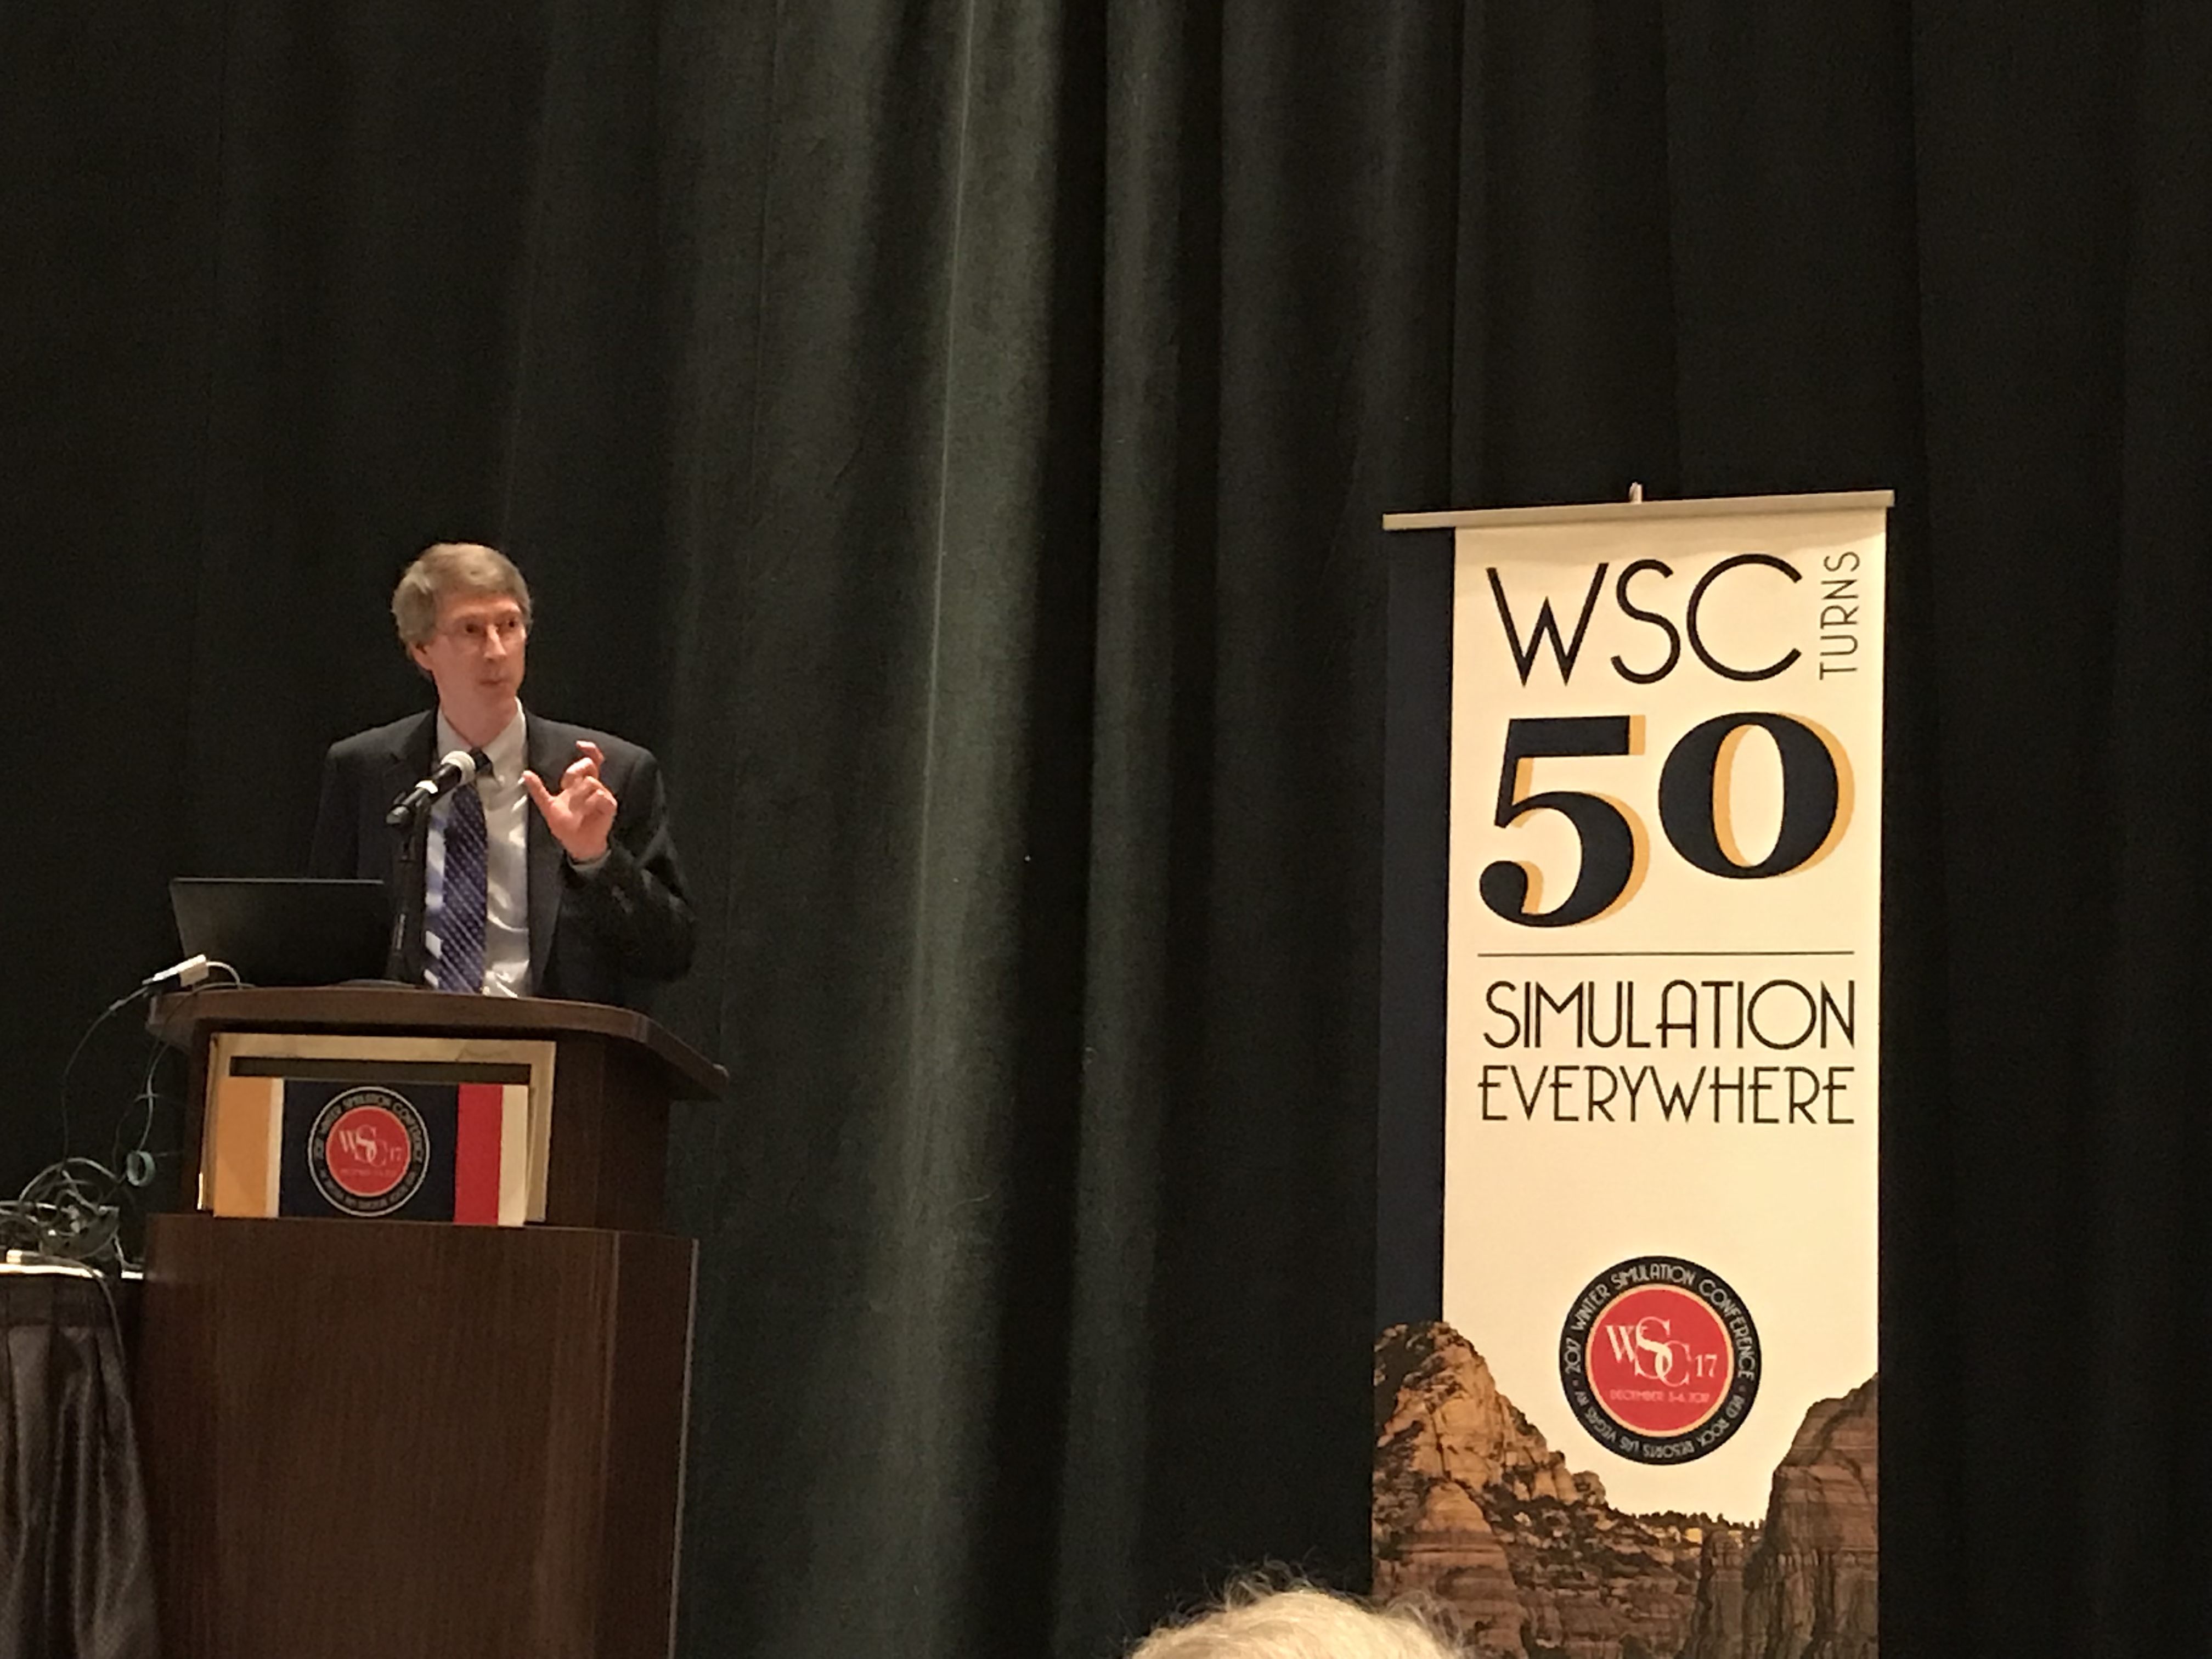 Barry Nelson presented the Winter Simulation Conference 50th Anniversary keynote address